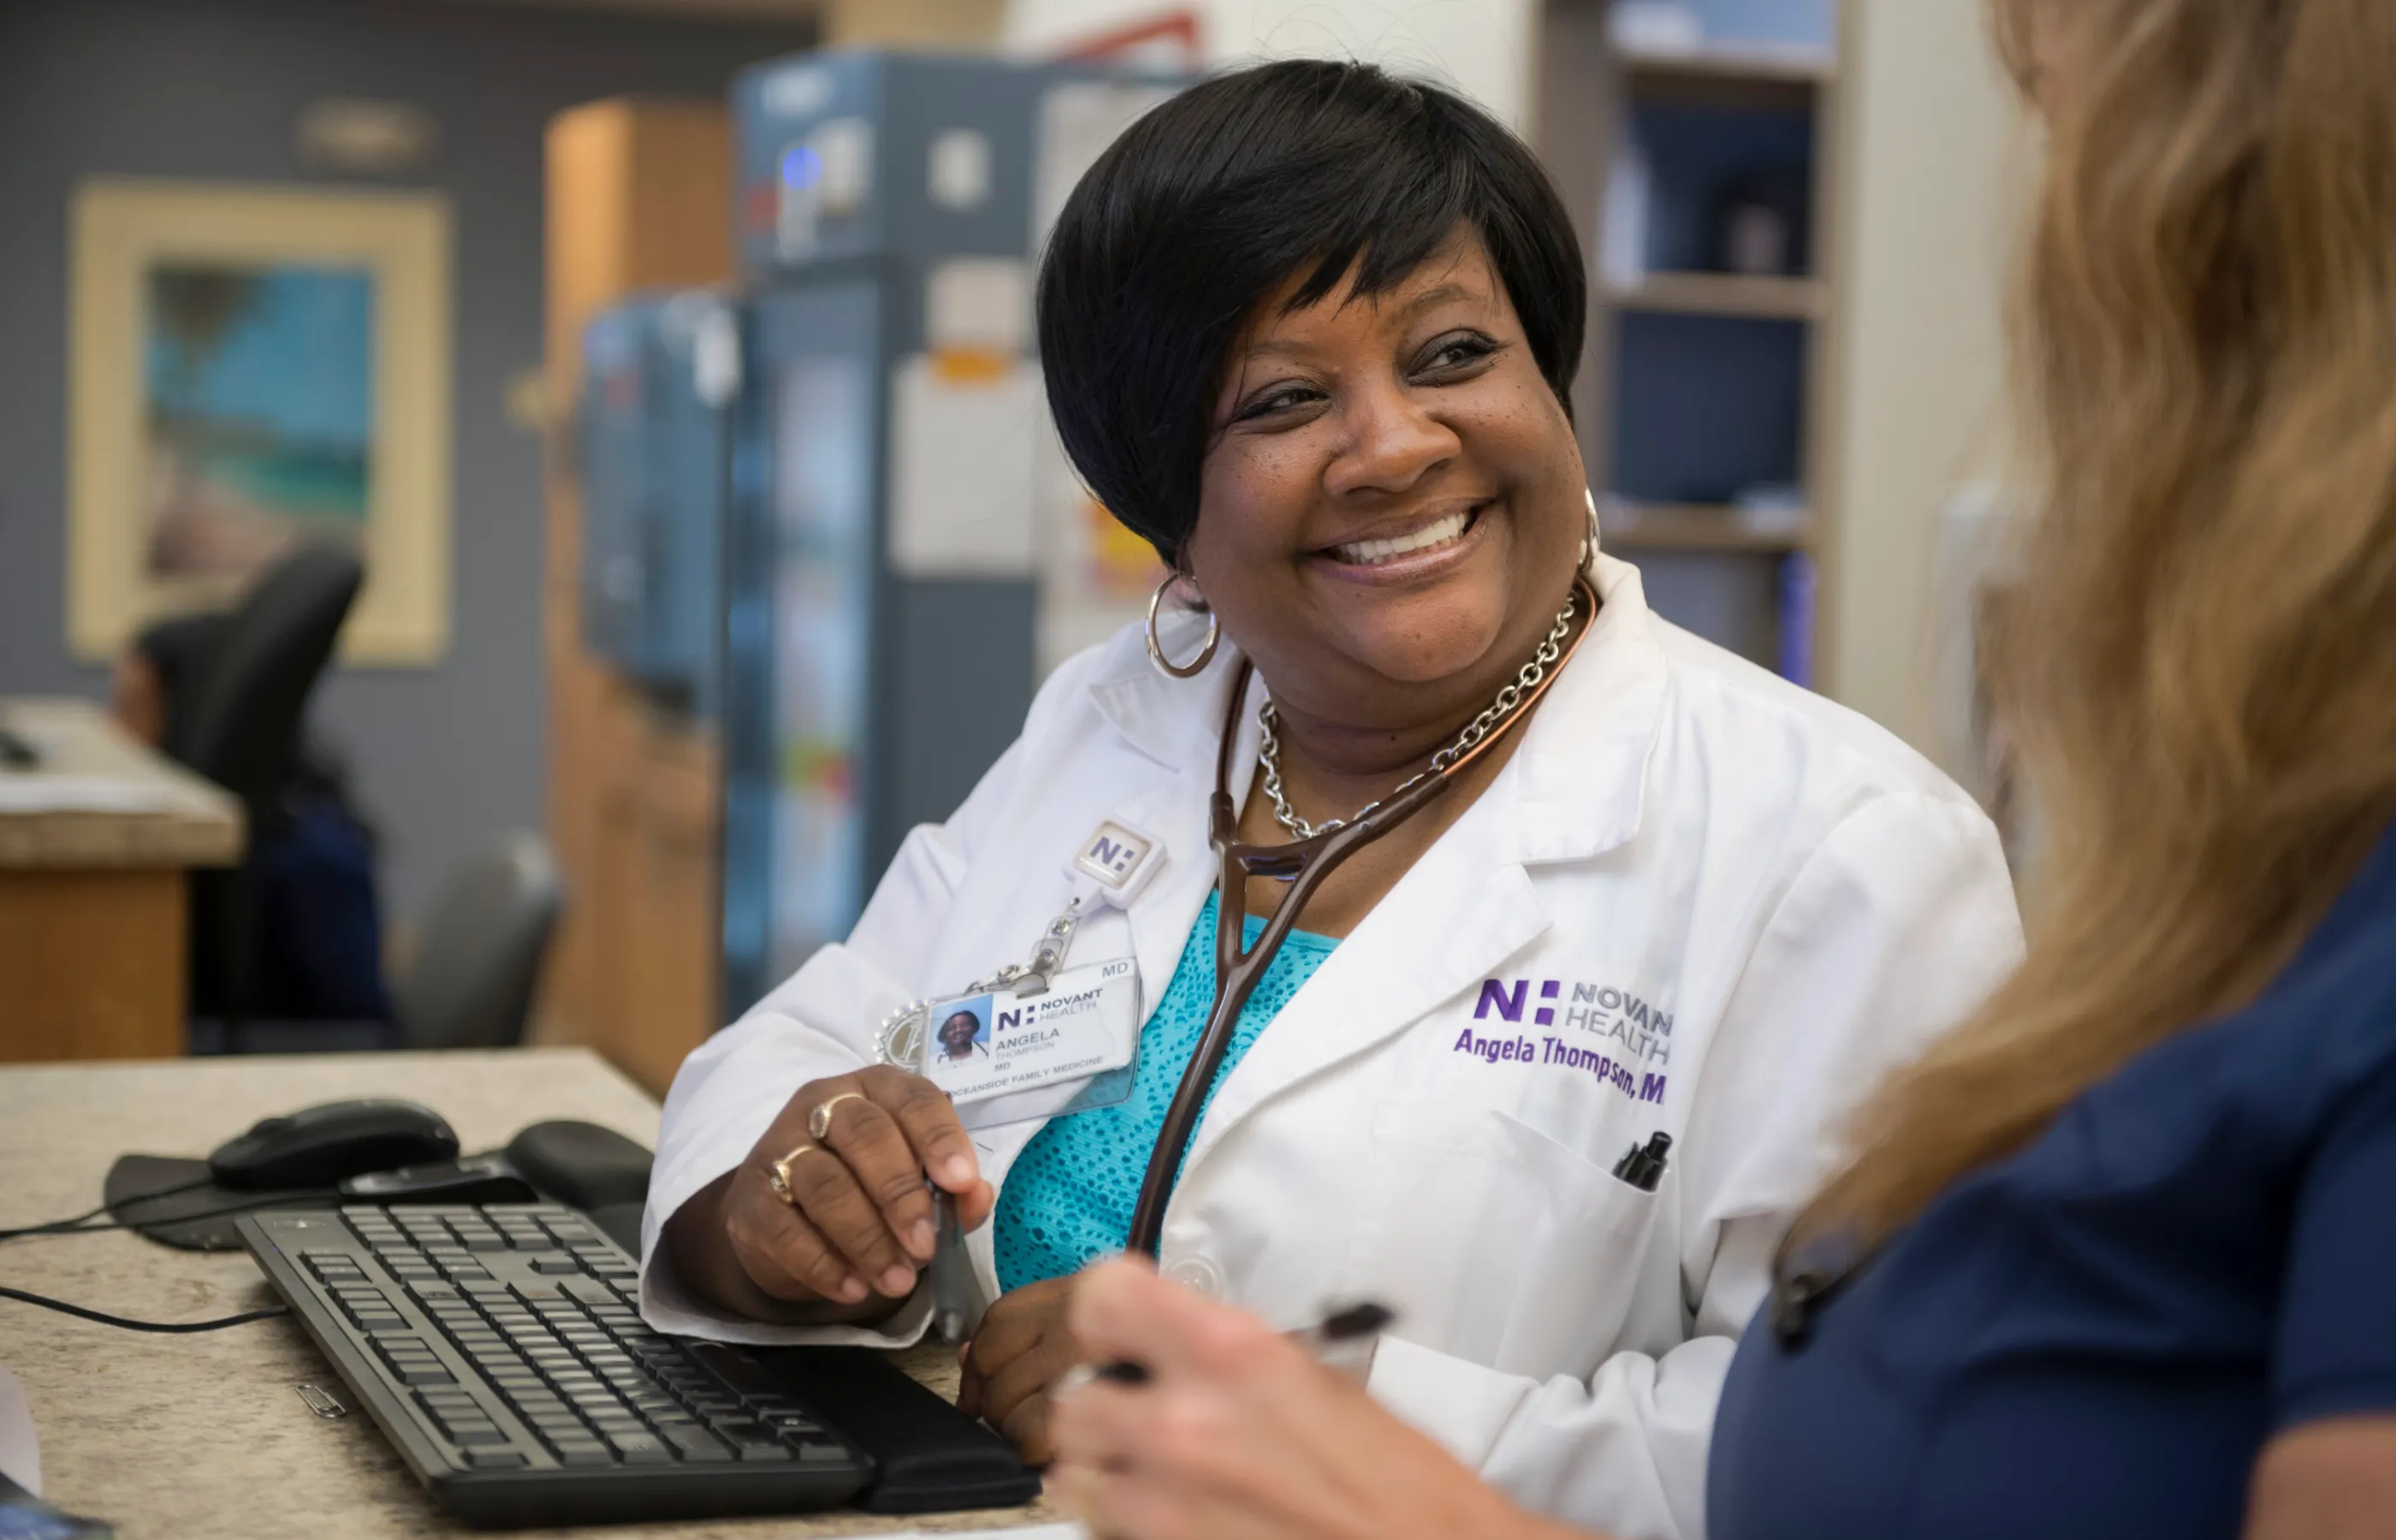 Novant Health Physician, Dr. Thompson, is sitting at a computer talking and smiling with a team member. 